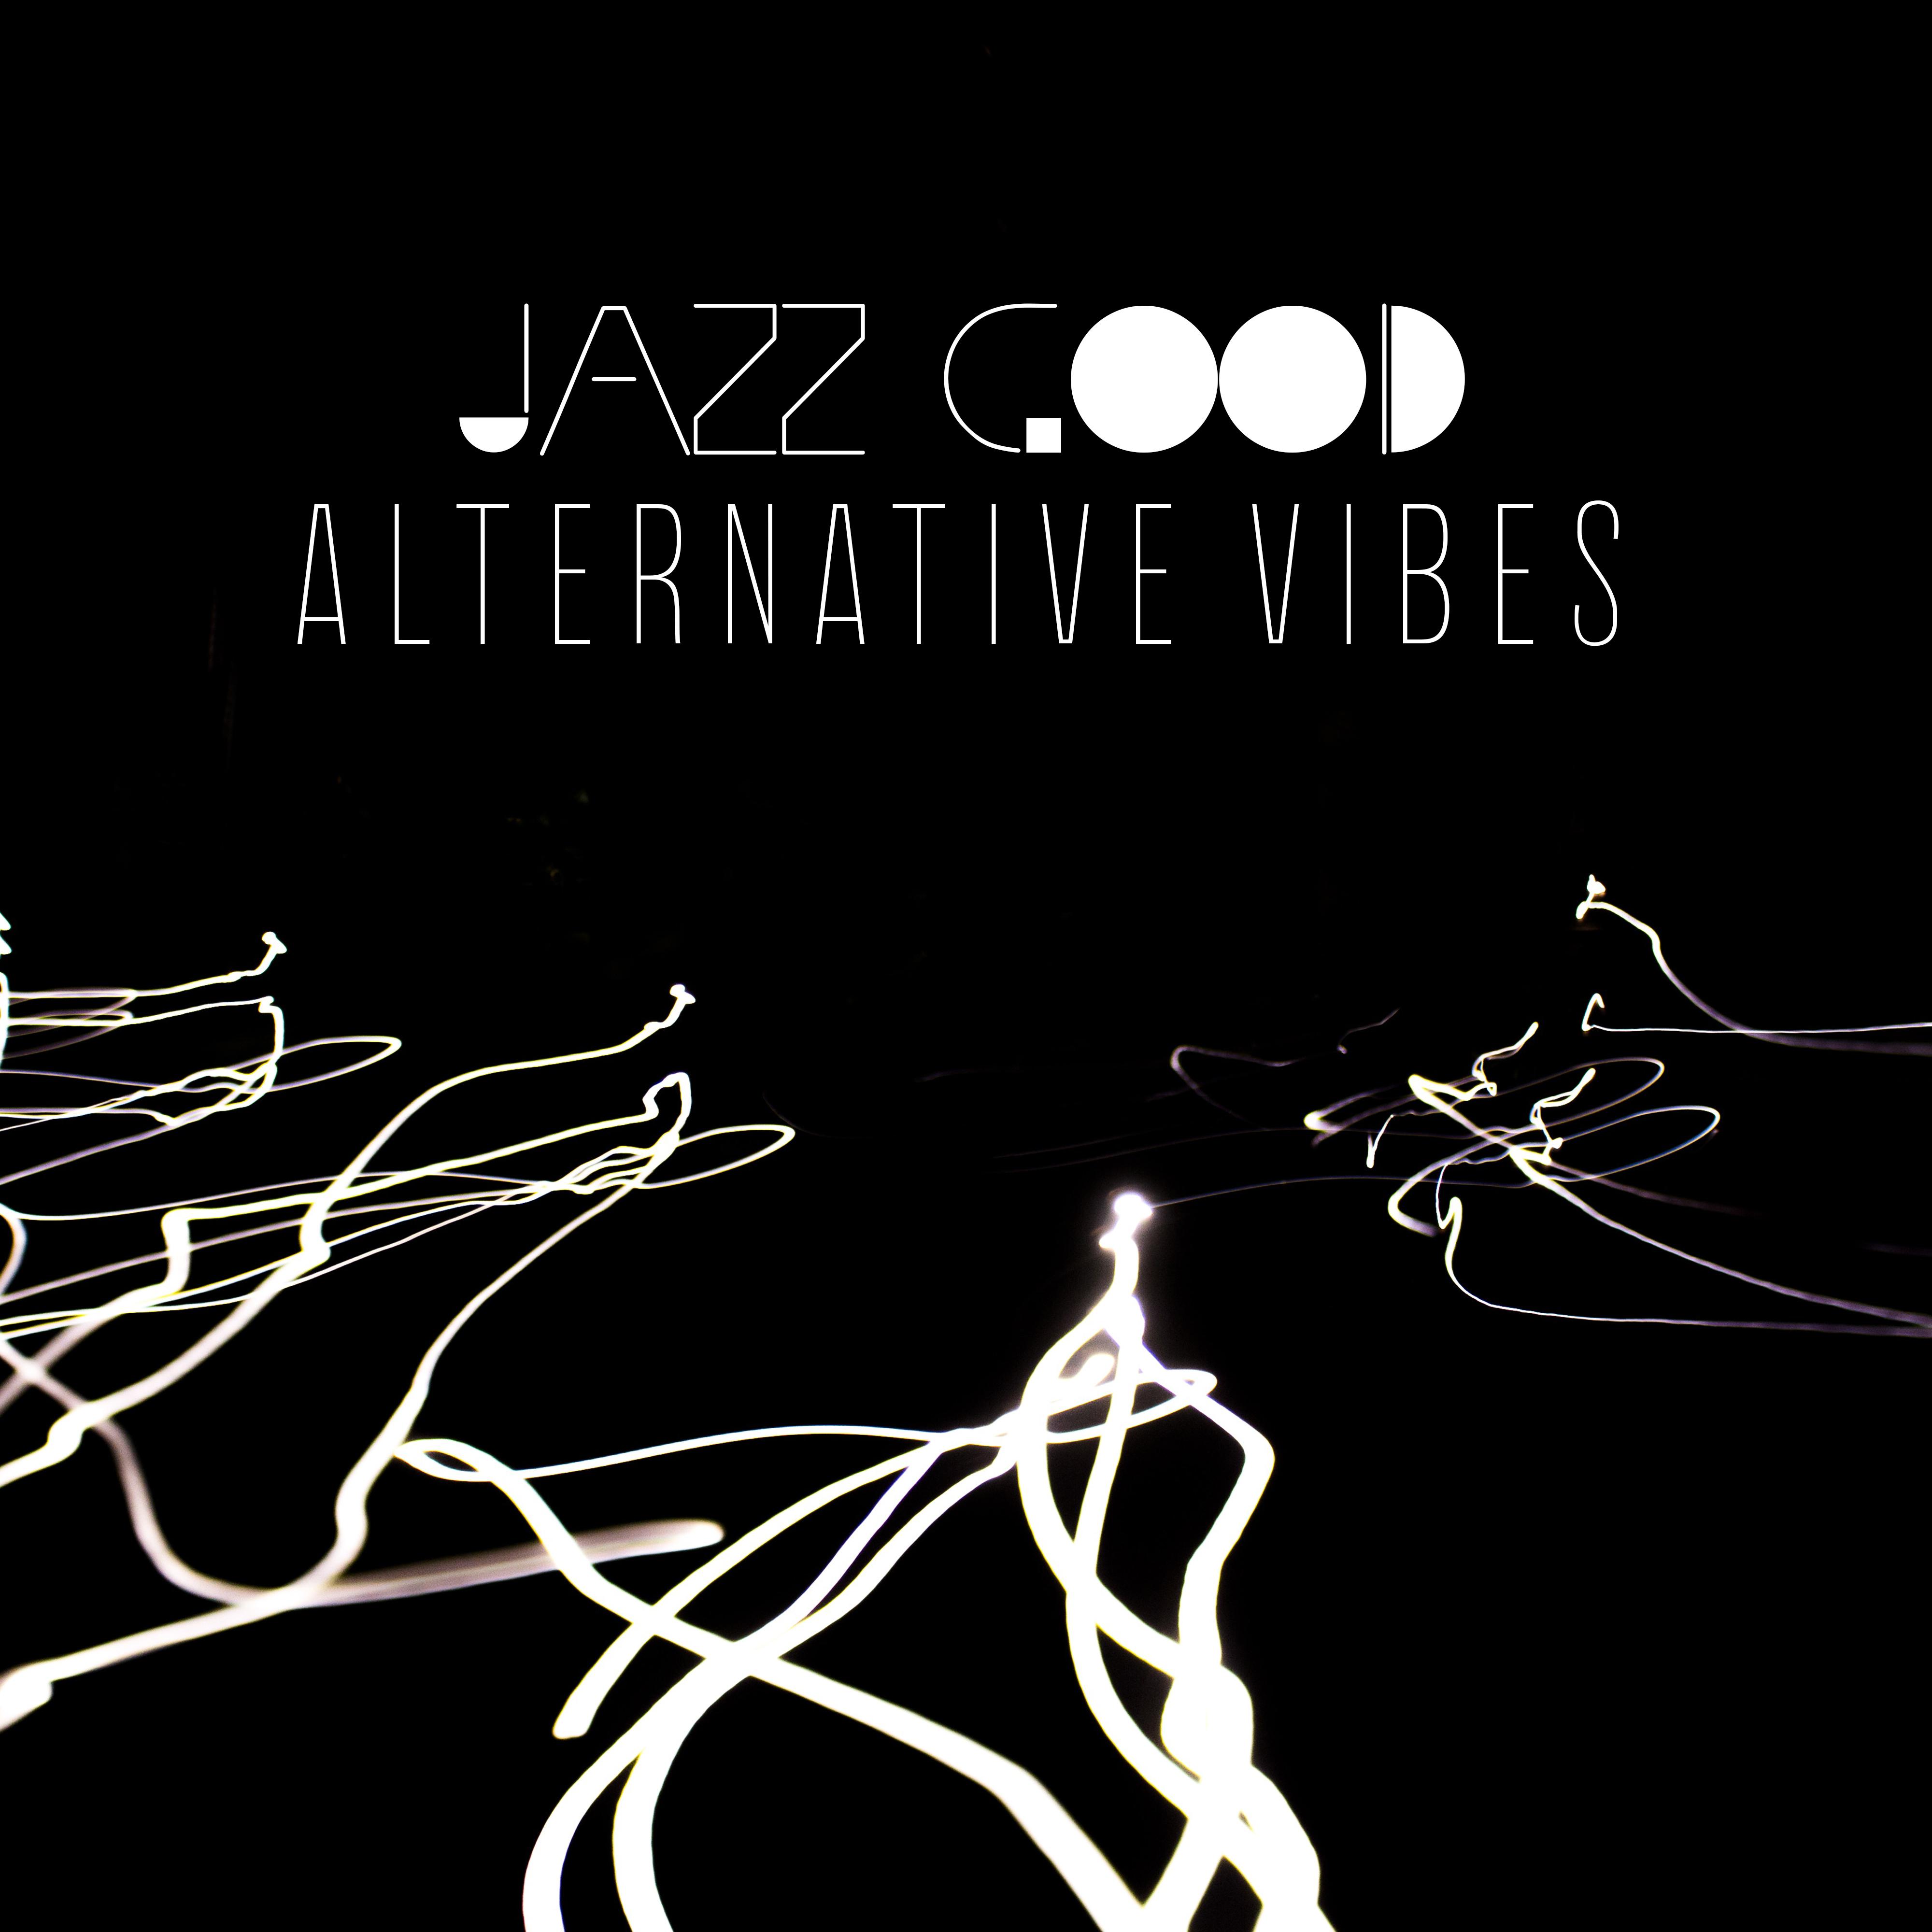 Jazz Good Alternative Vibes – Instrumental Smooth Vintage Melodies to Relax & Party with Friends